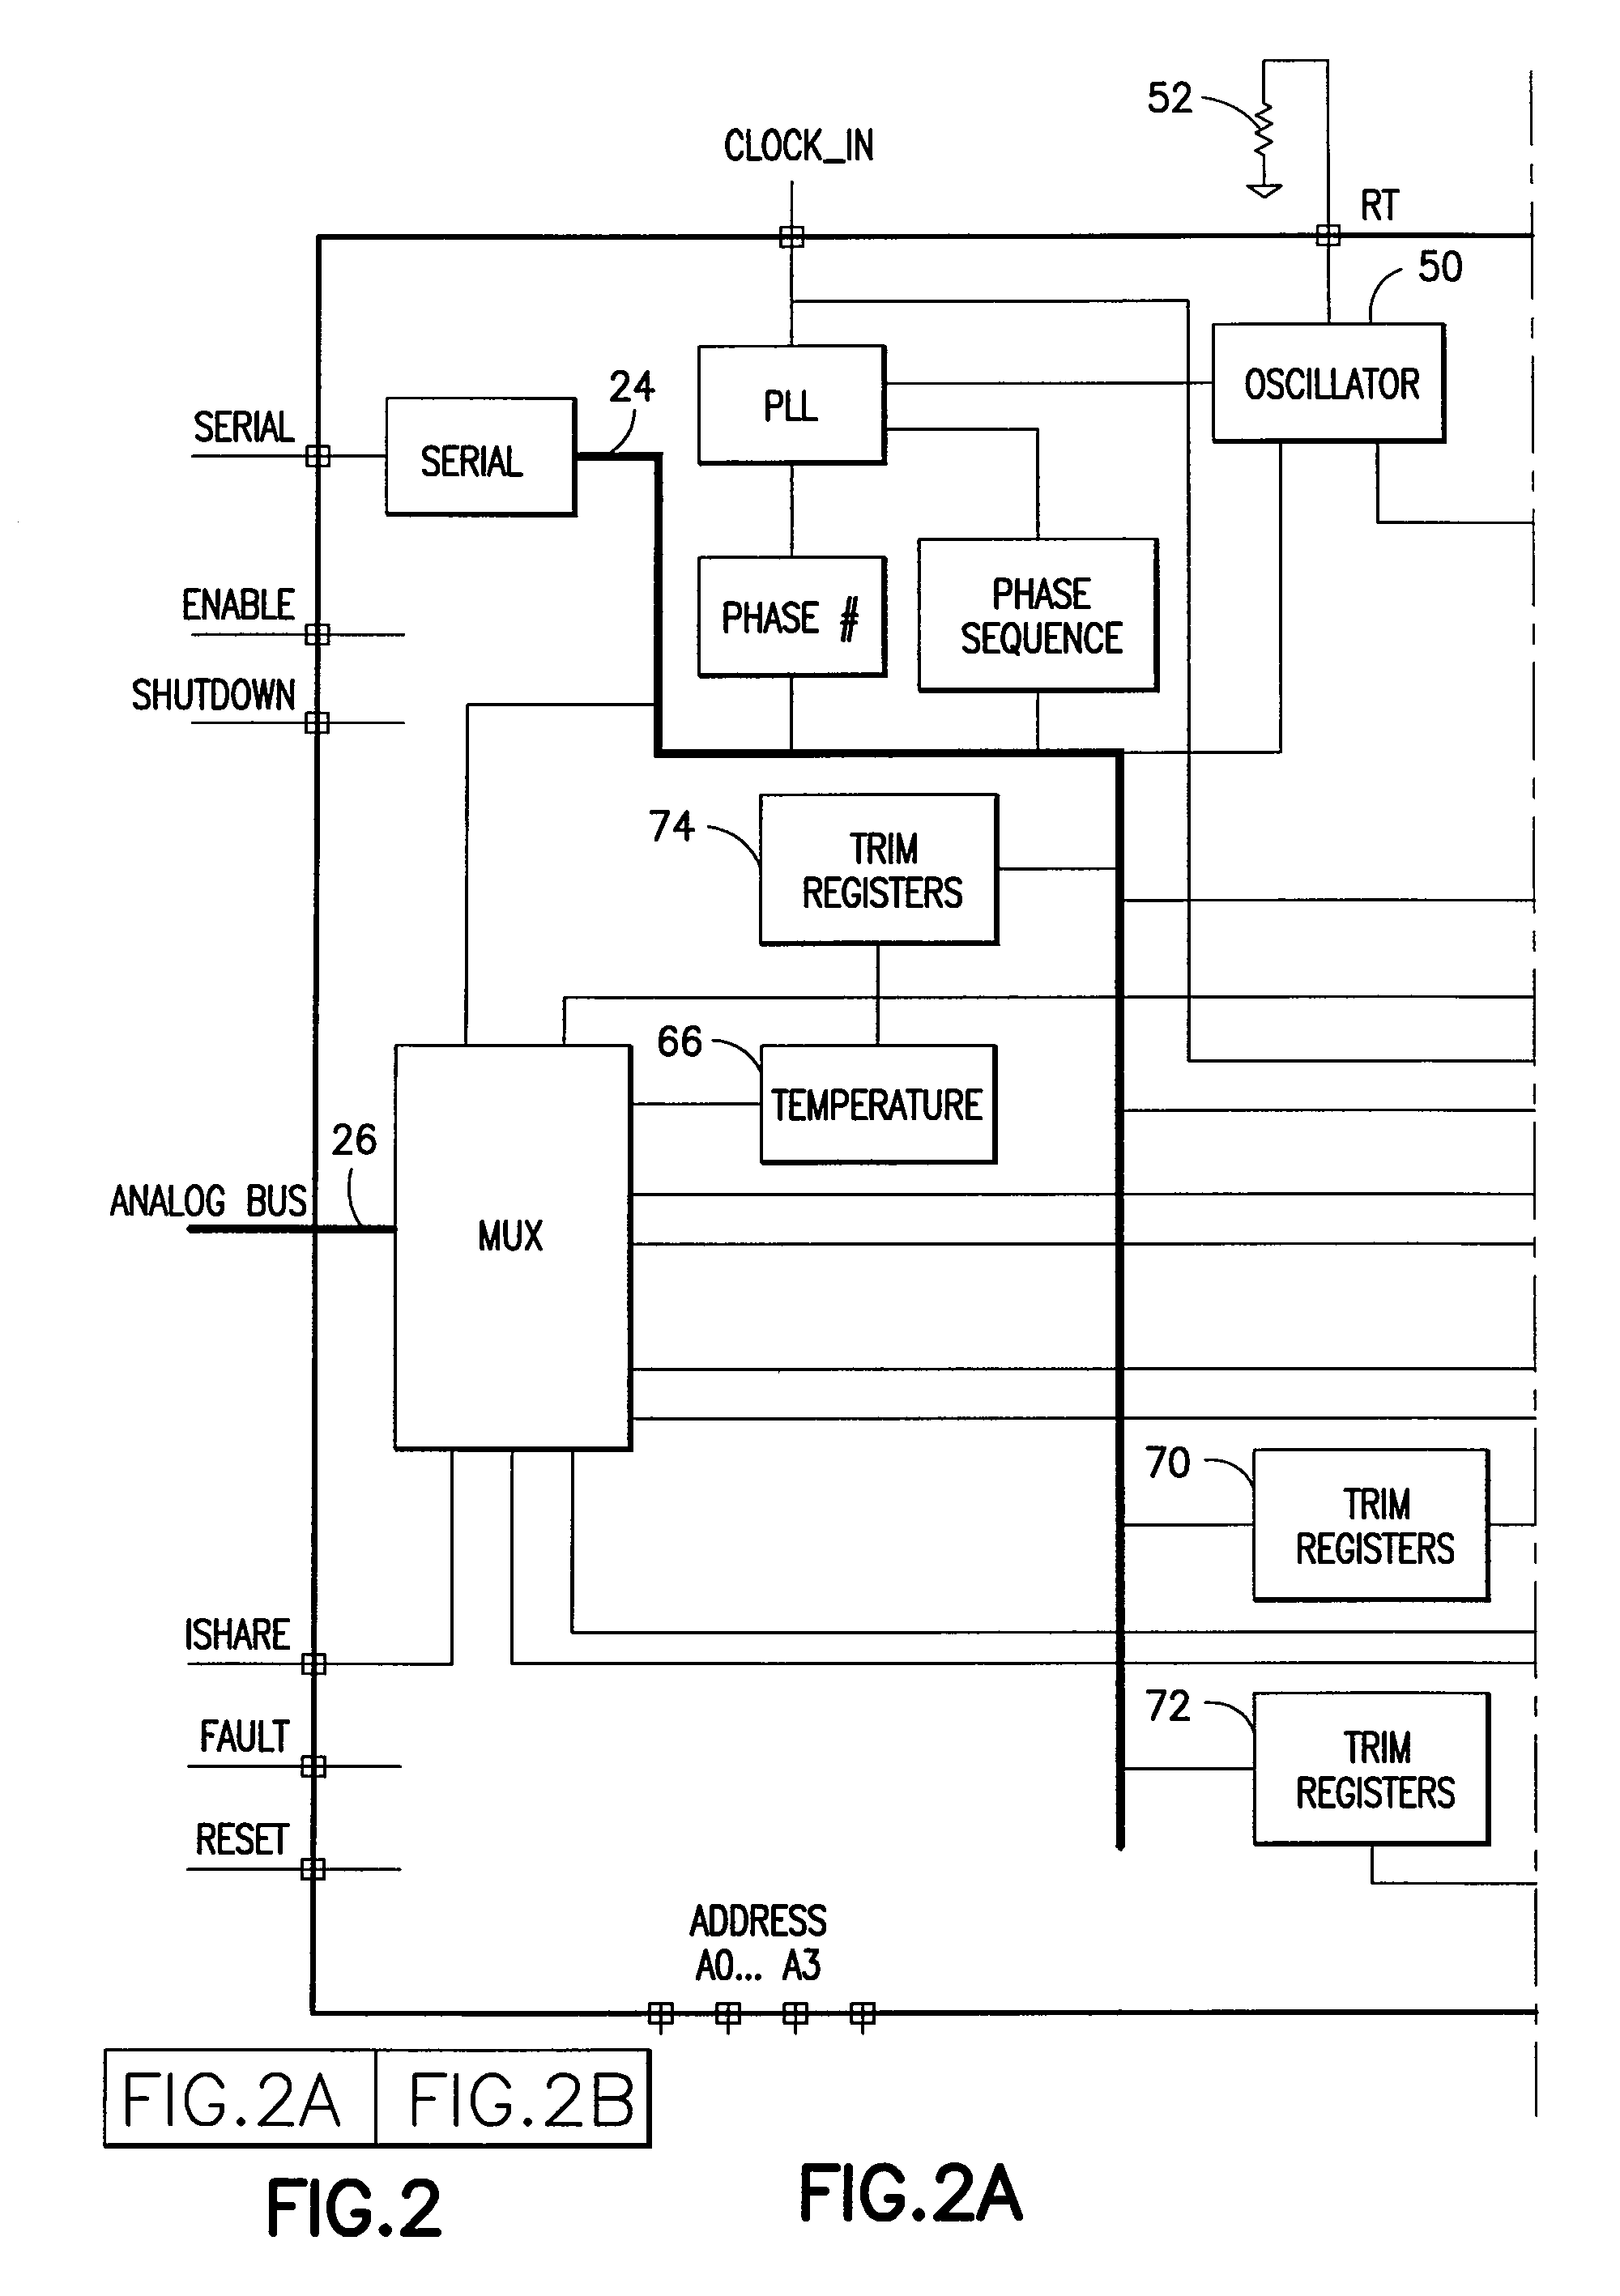 POL system architecture with analog bus